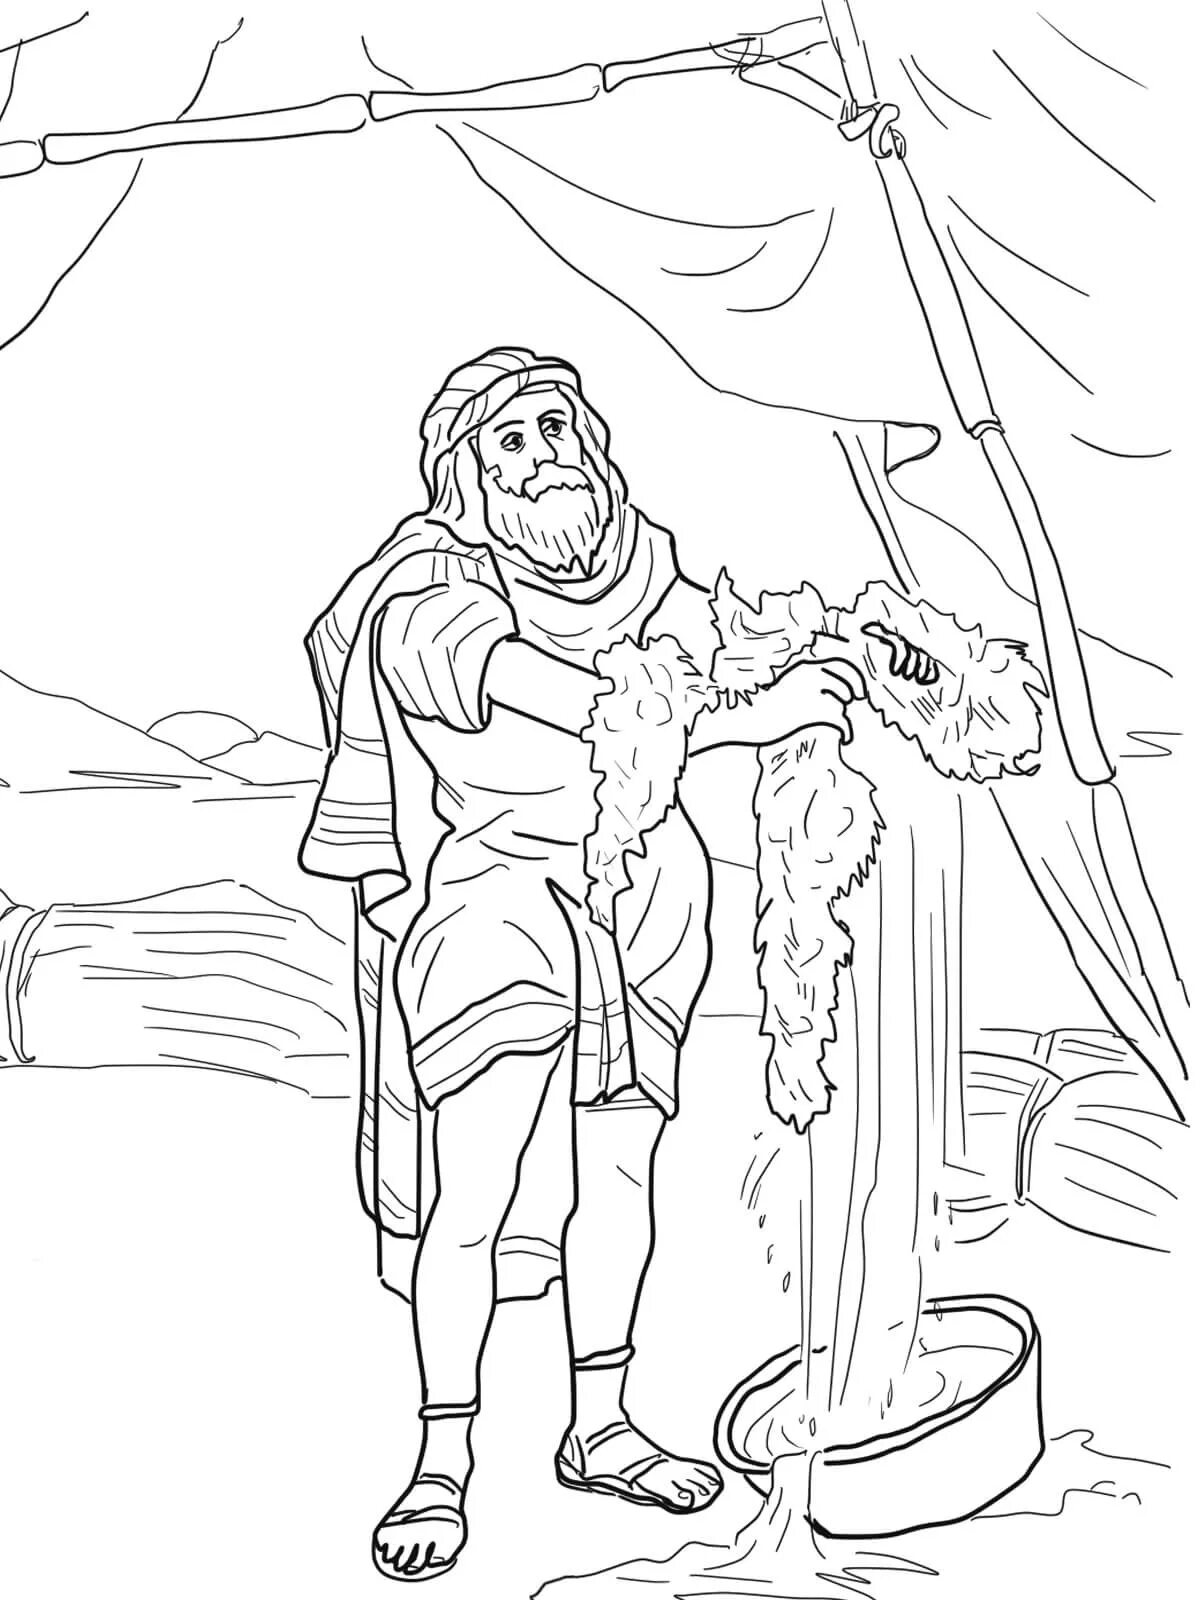 Coloring page dazzling gideon